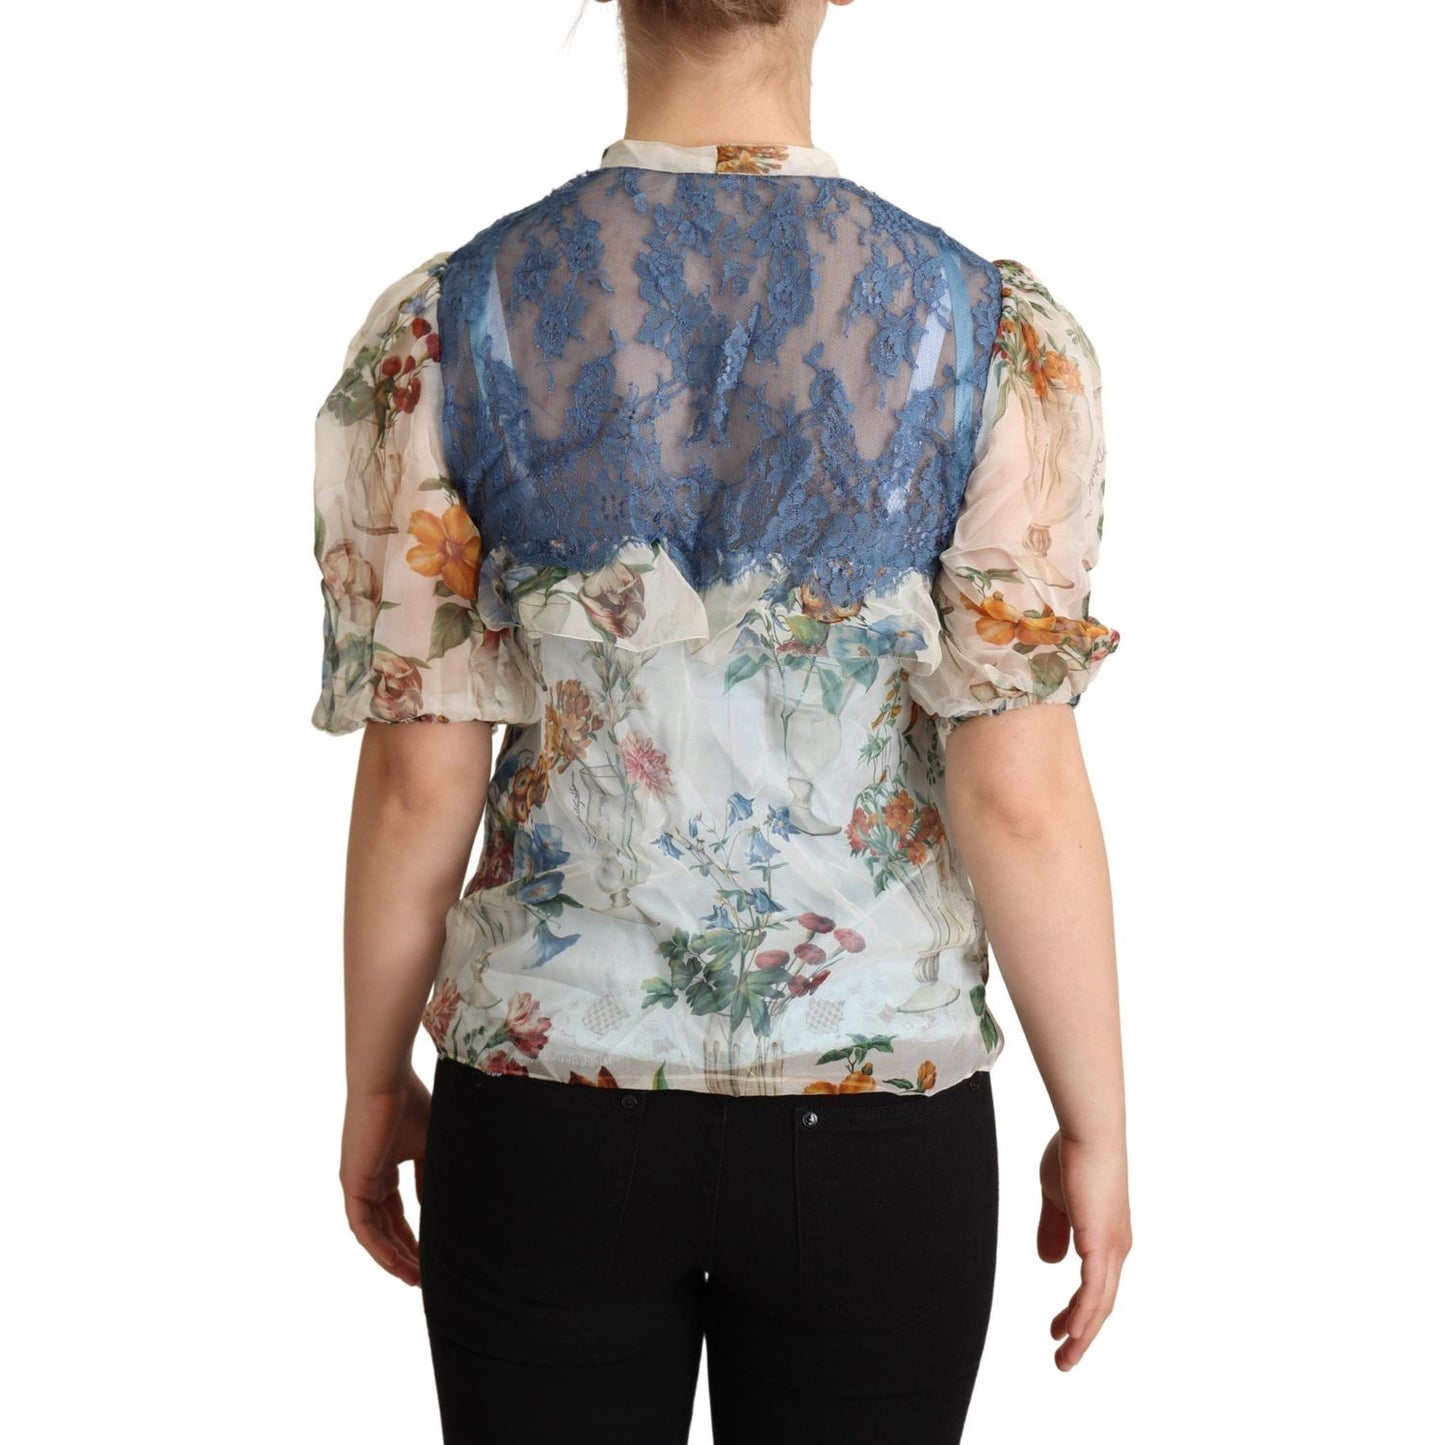 Dolce & Gabbana Chic Floral Silk Blouse with Ascot Collar chic-floral-silk-blouse-with-ascot-collar